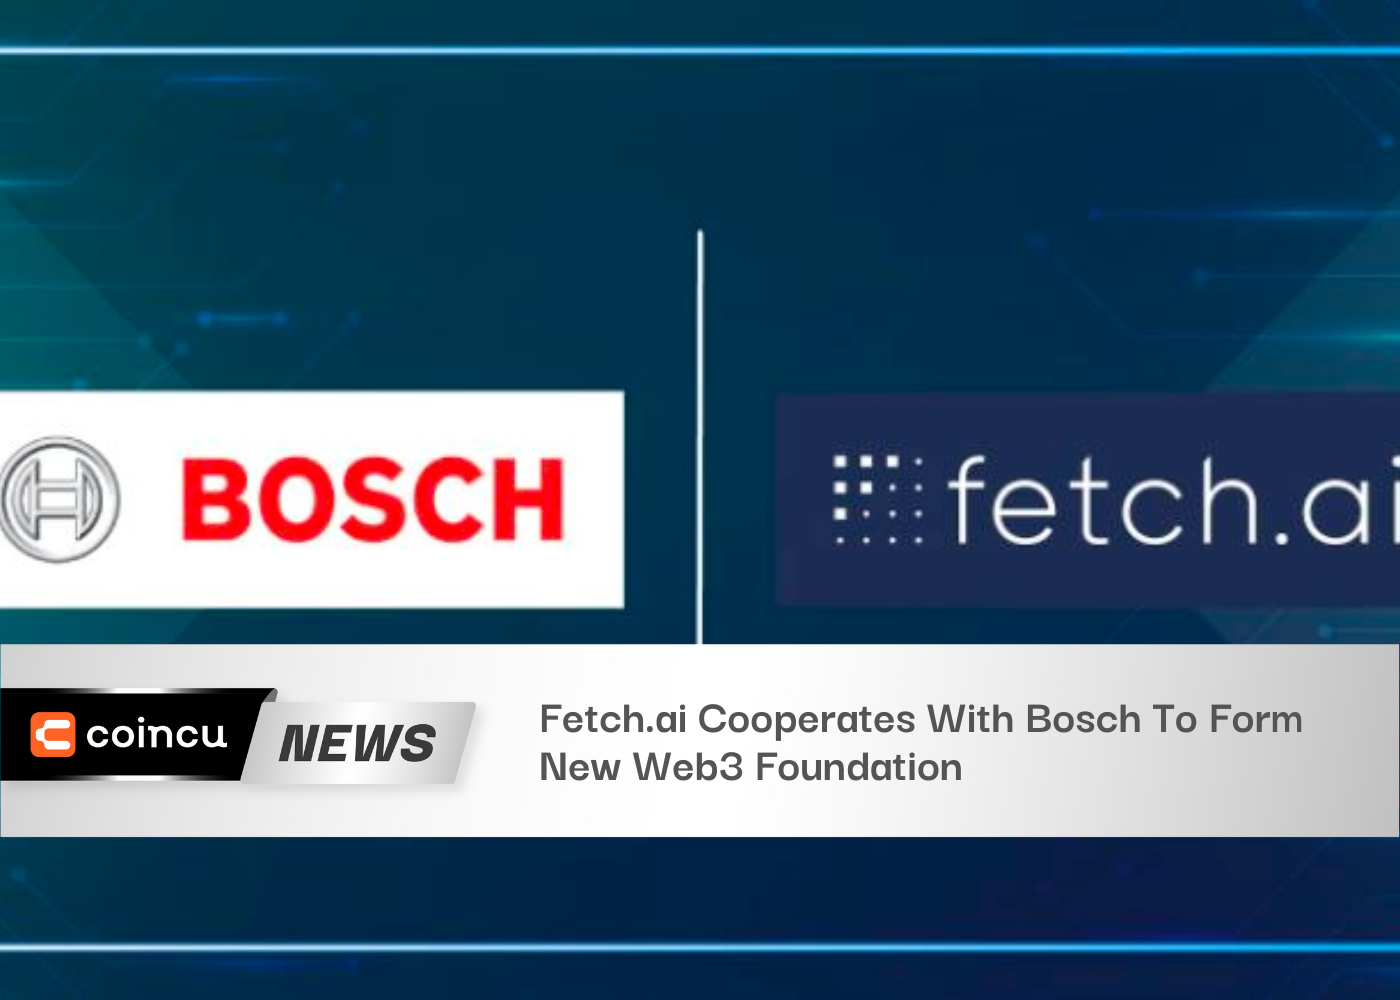 Fetch.ai Cooperates With Bosch To Form New Web3 Foundation